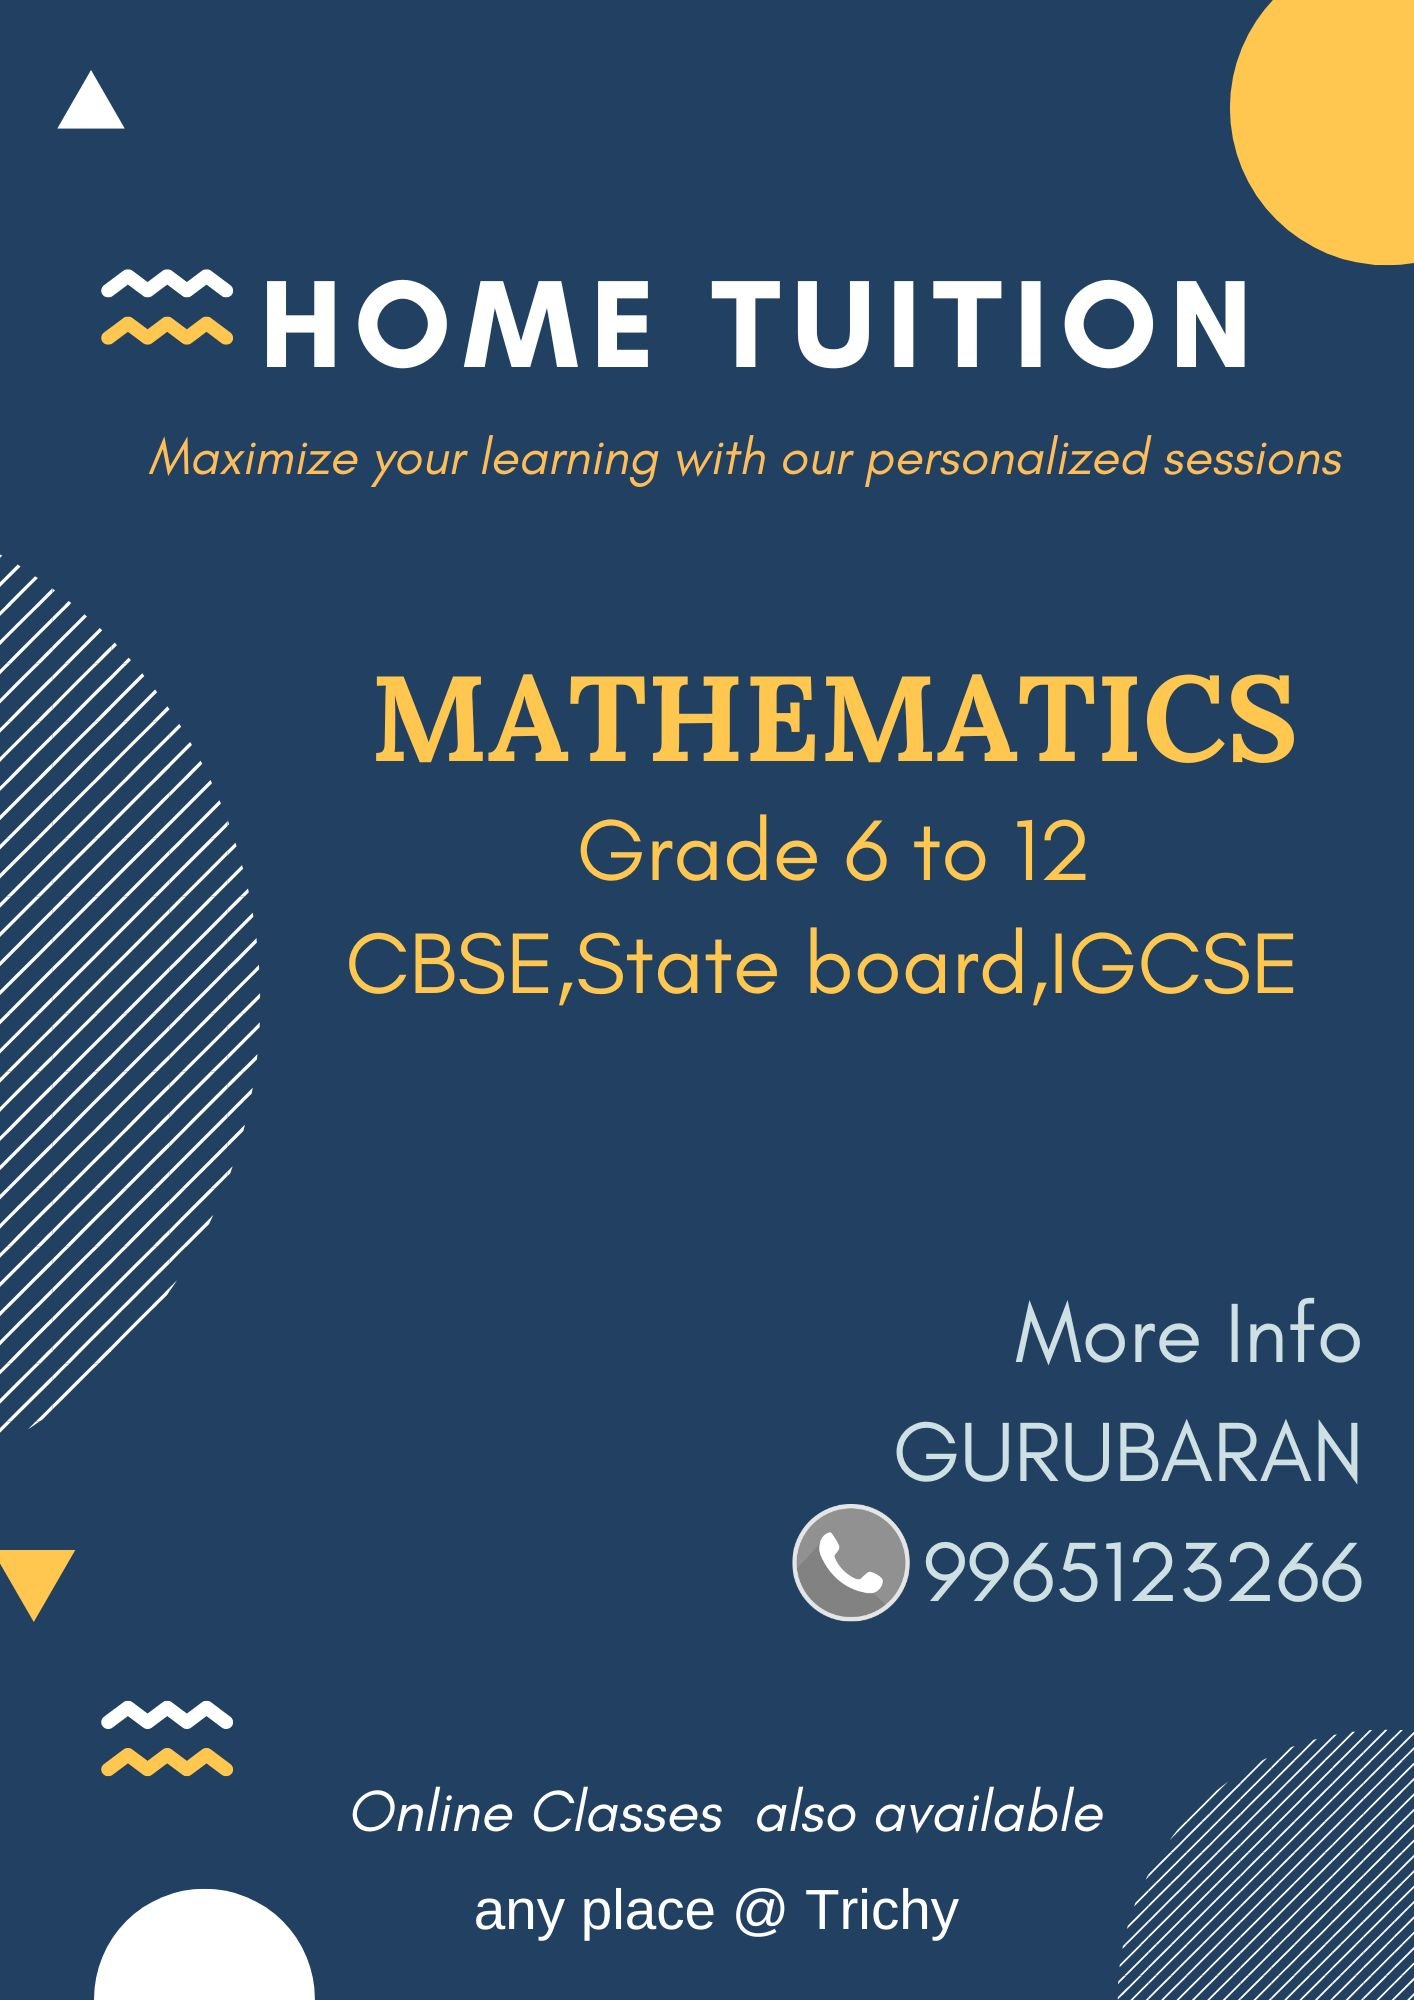 Class 11th/ 12th Tuition, Class 9th/ 10th Tuition, Mathematics, Middle Class (6th -8th) Tuition; Exp: More than 10 year